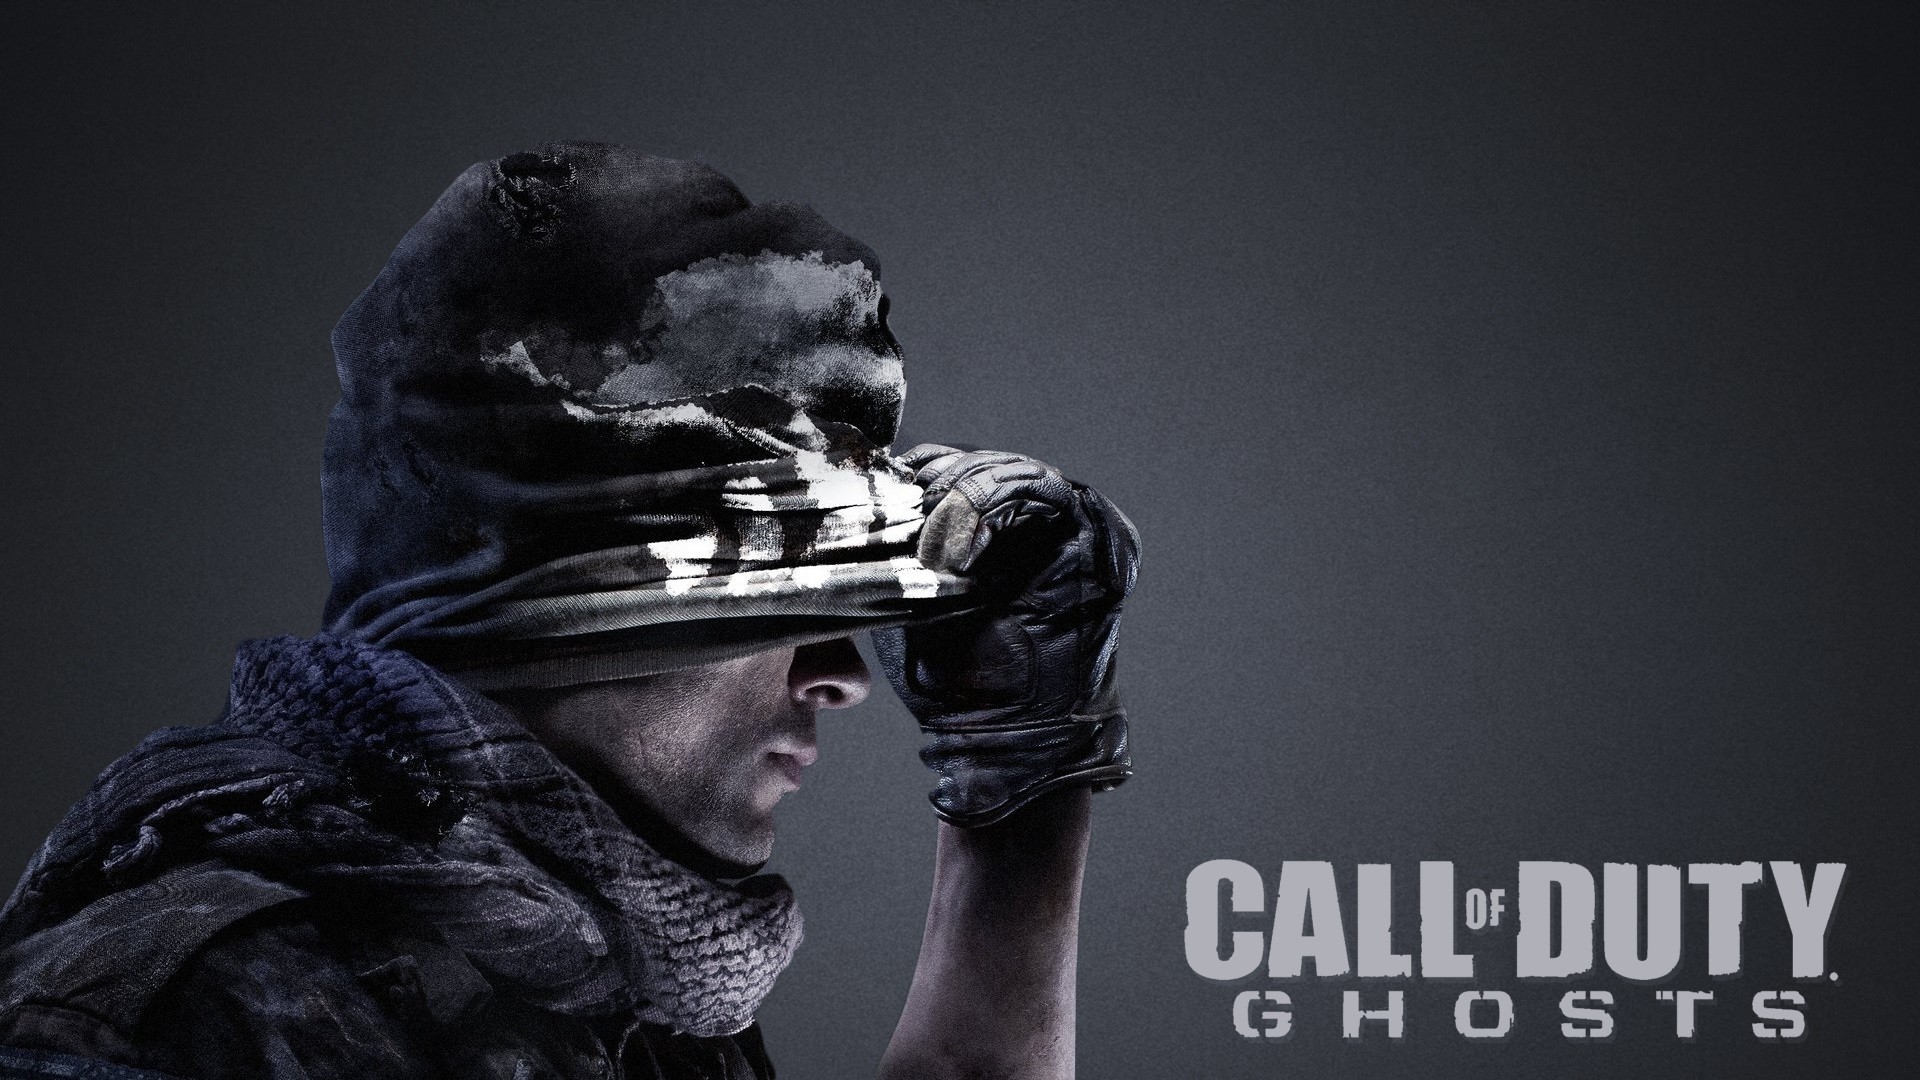 1920x1080 Call Of Duty Ghosts Wallpaper 20776